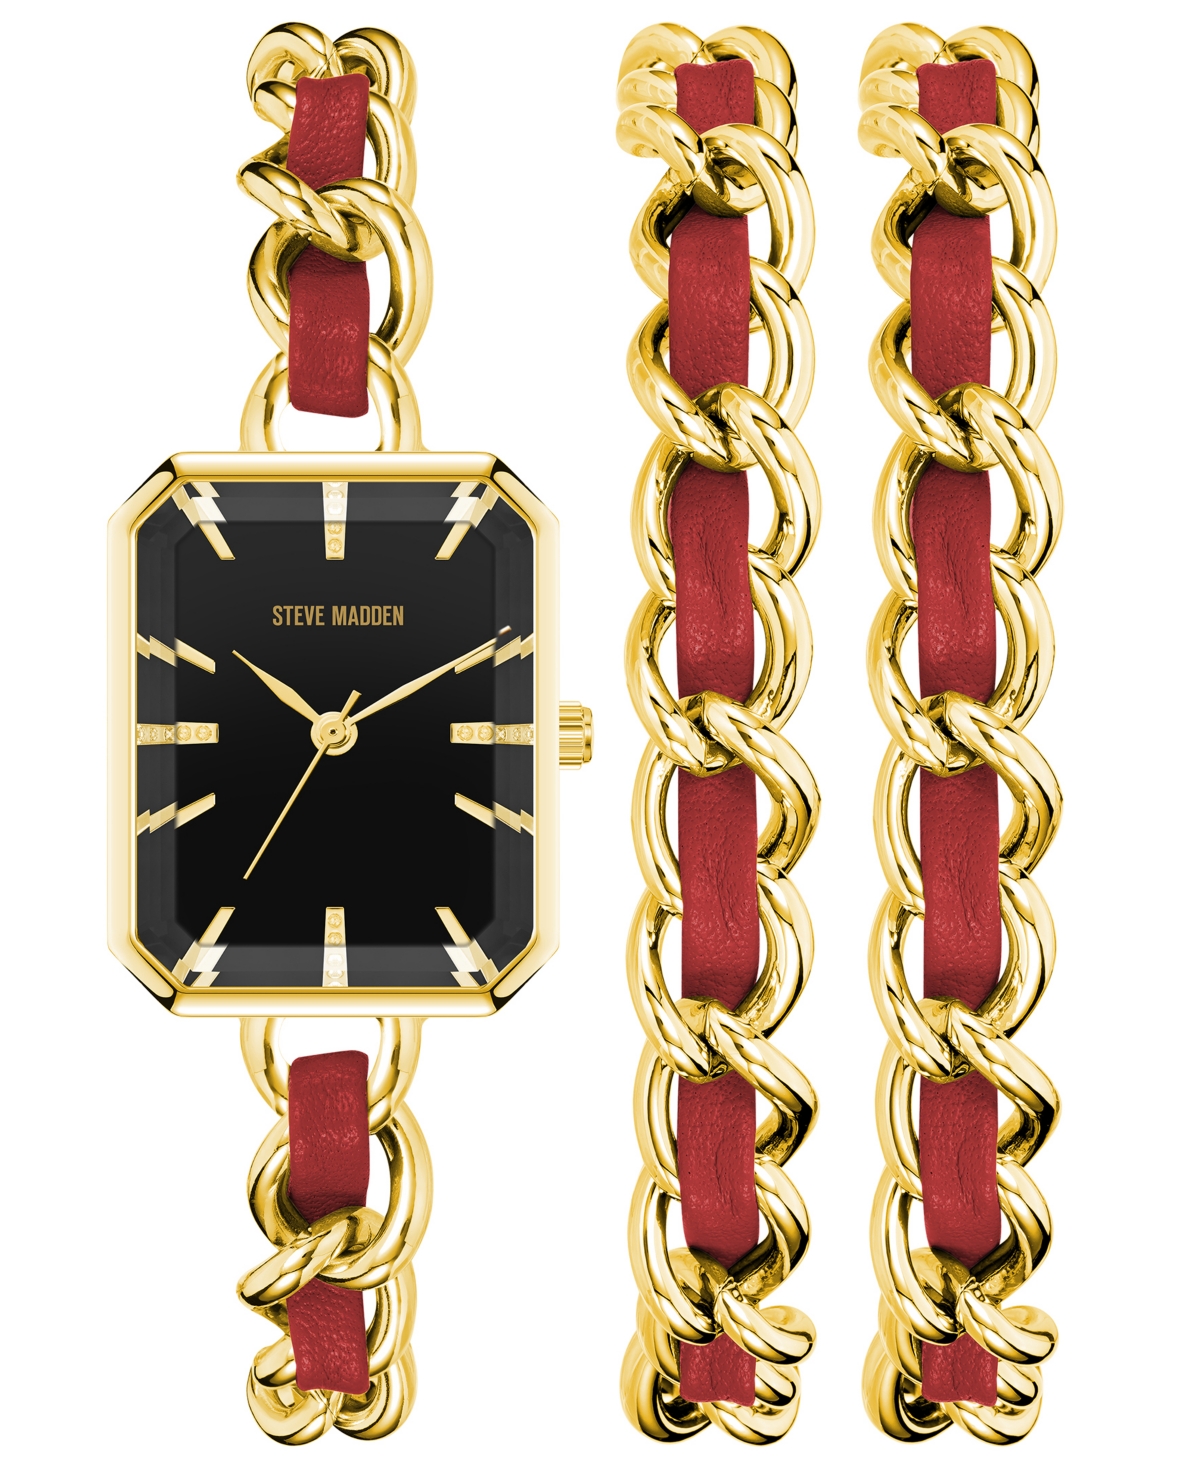 Steve Madden Women's Gold-tone Alloy Chain With Red Insert Bracelet Watch Set, 22mm In Gold-tone,red